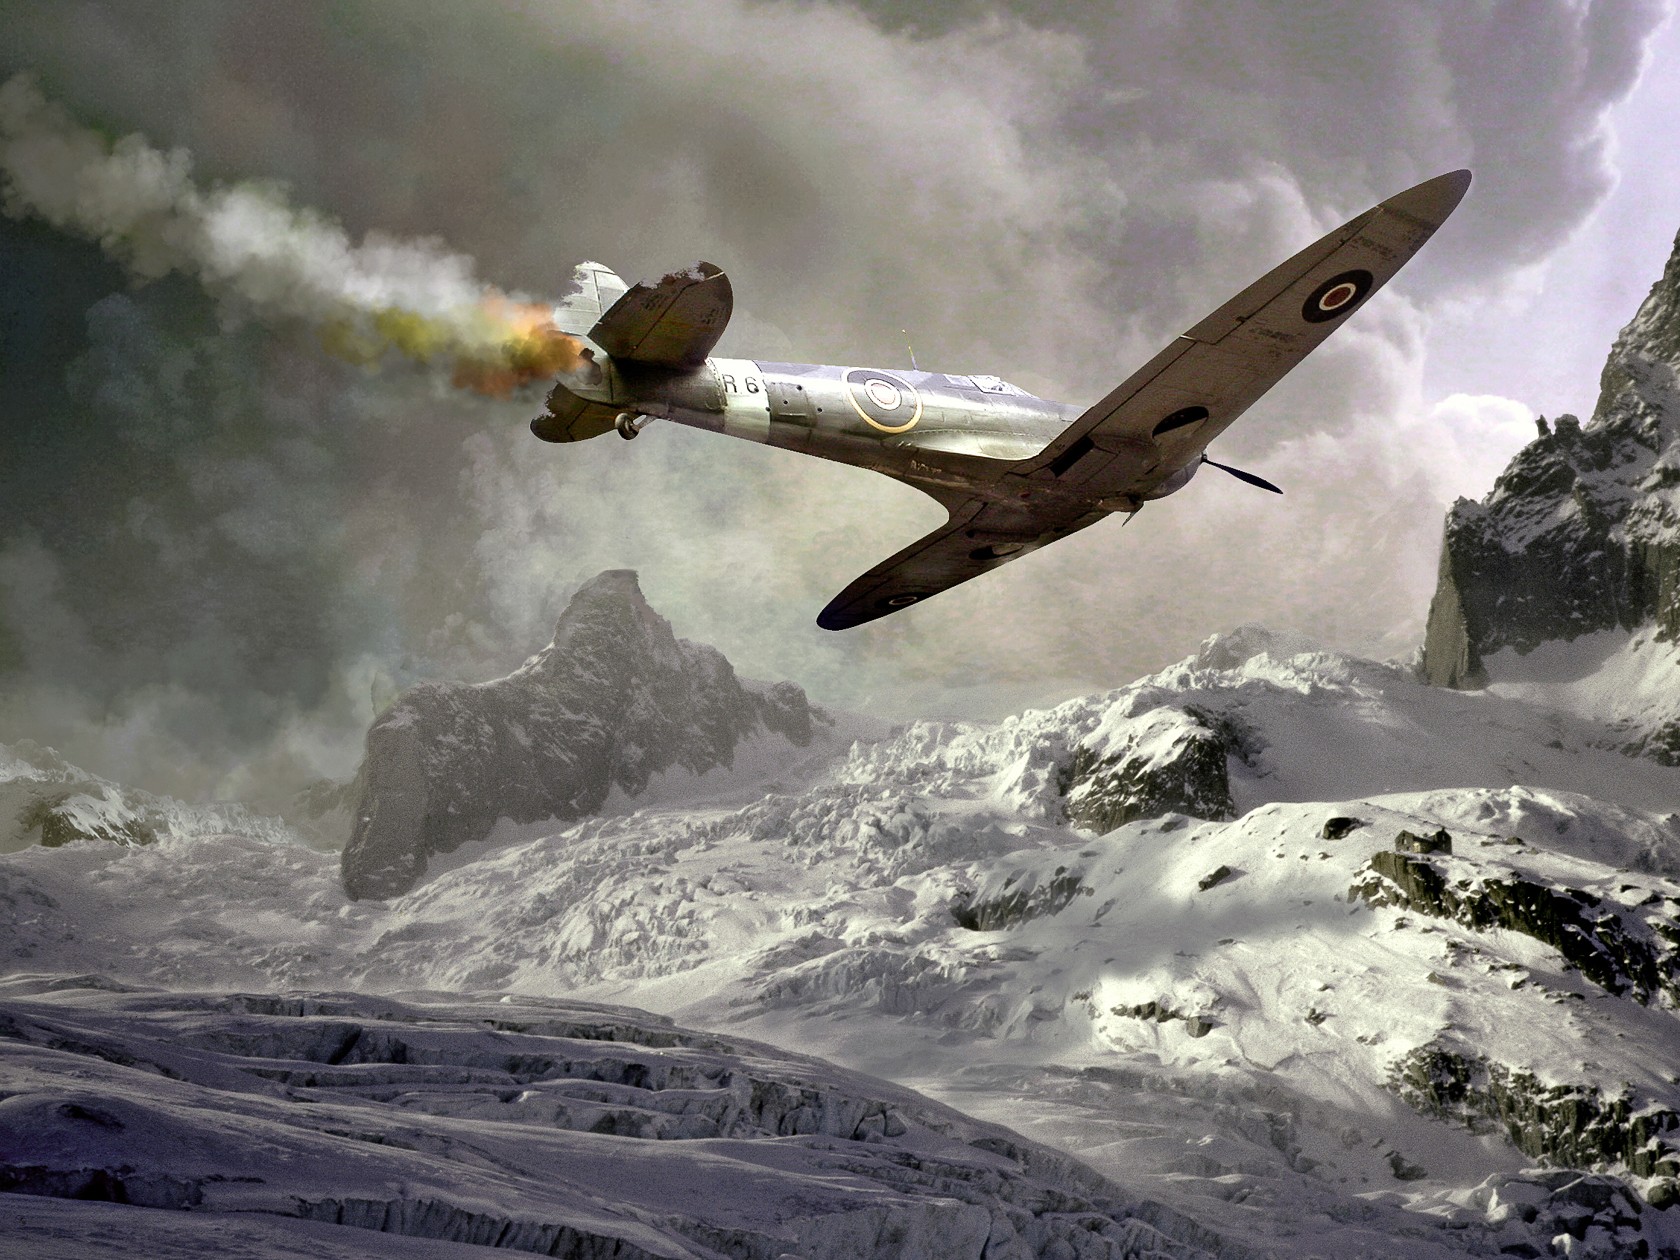 General 1680x1260 airplane vintage snow mountains military military aircraft vehicle British aircraft